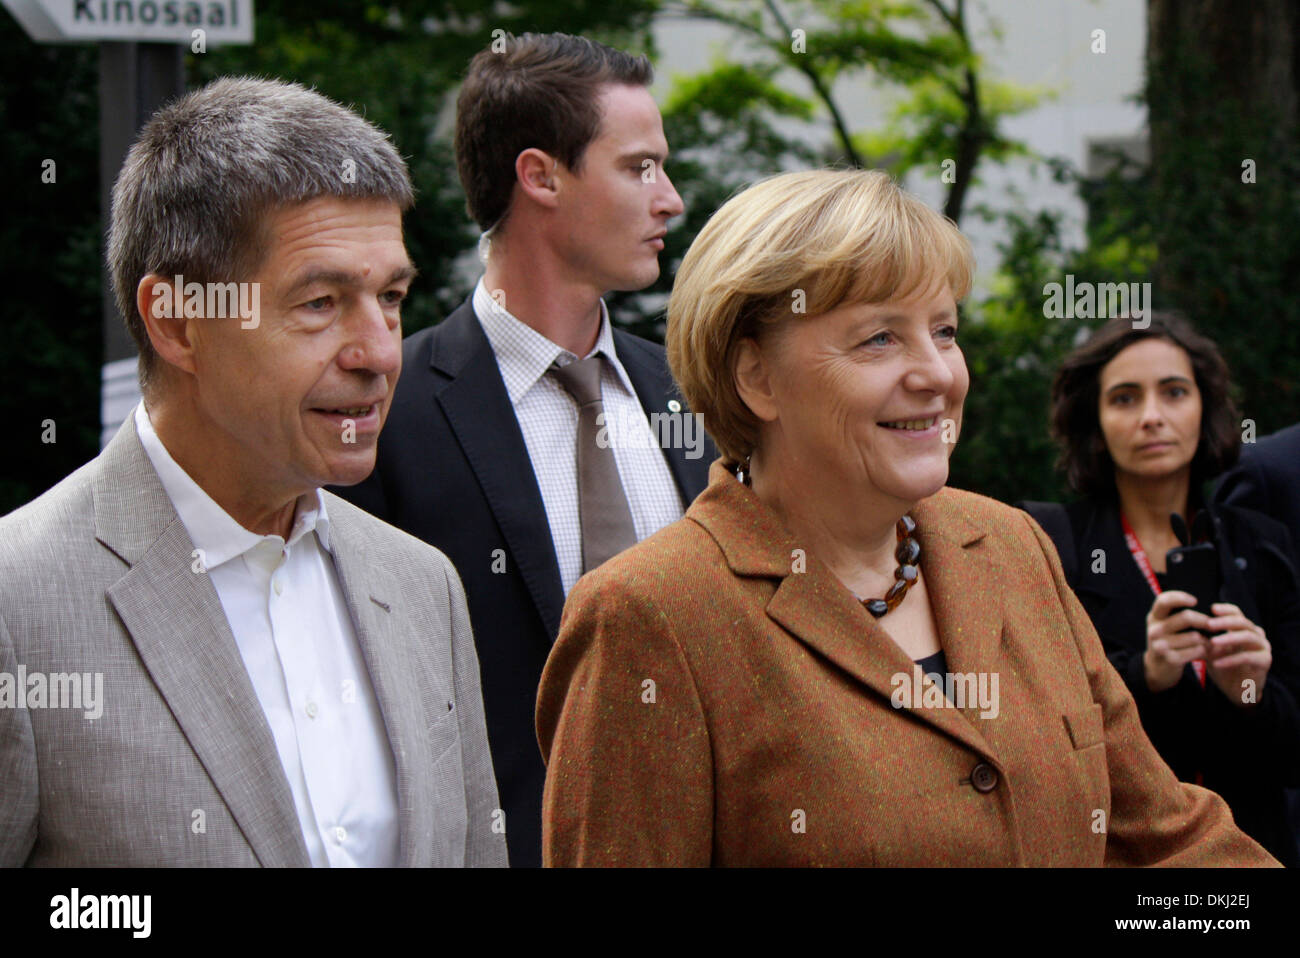 German Chancellor Angela Merkel with her husband, Joachim Sauer, on the day of the general elections in Germany, September 22, 2013, Berlin Stock Photo